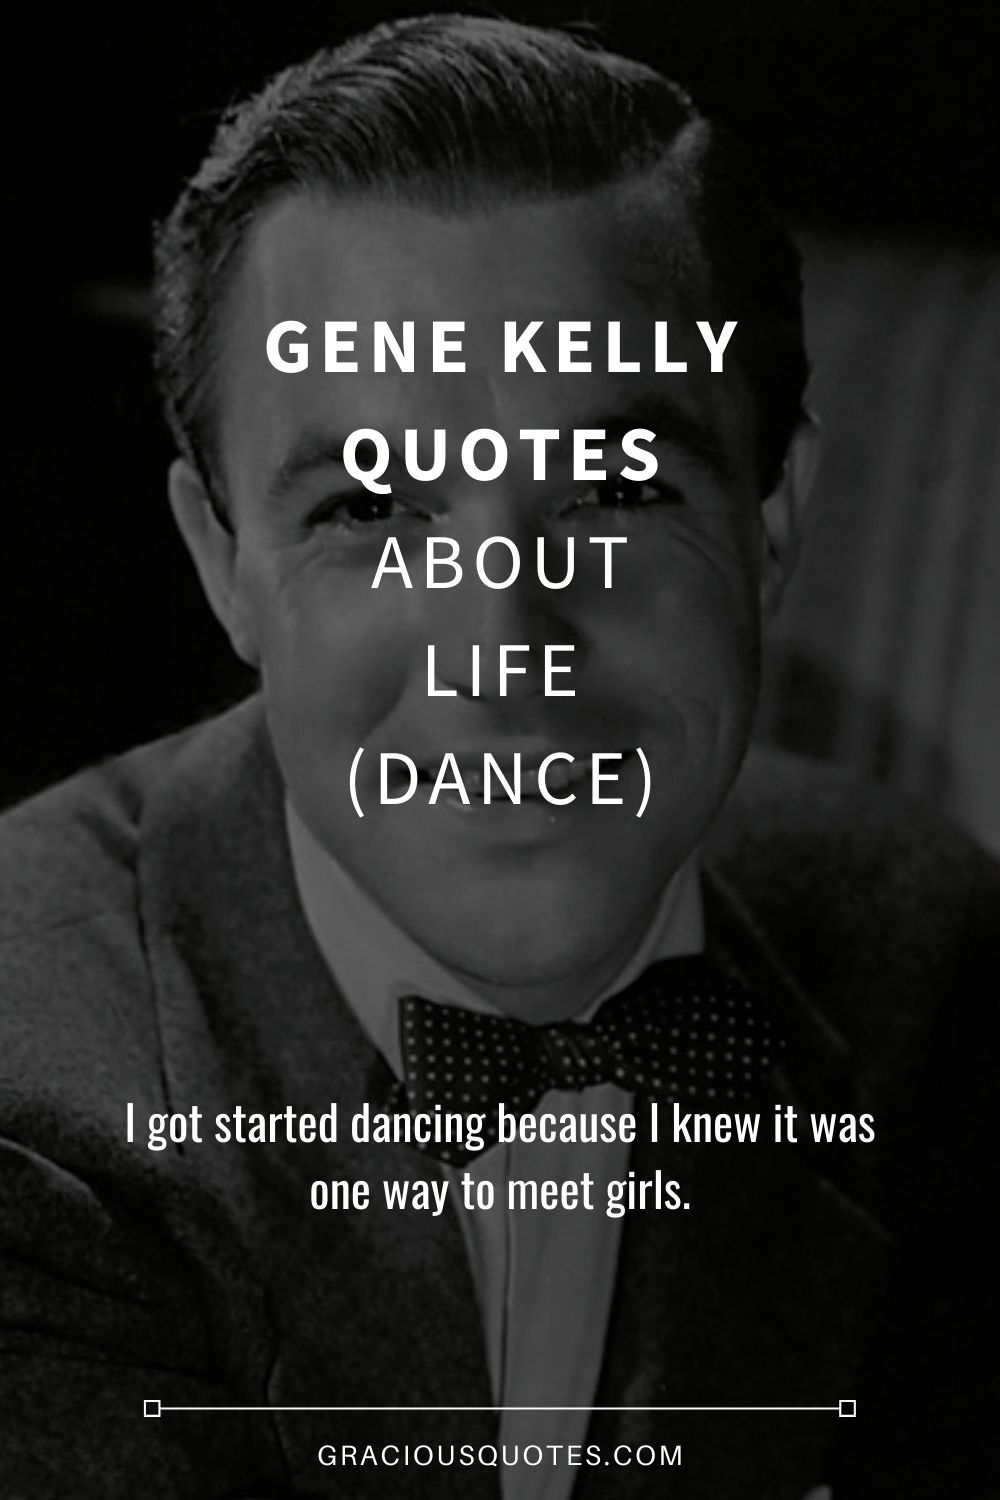 Gene Kelly Quotes About Life (DANCE) - Gracious Quotes